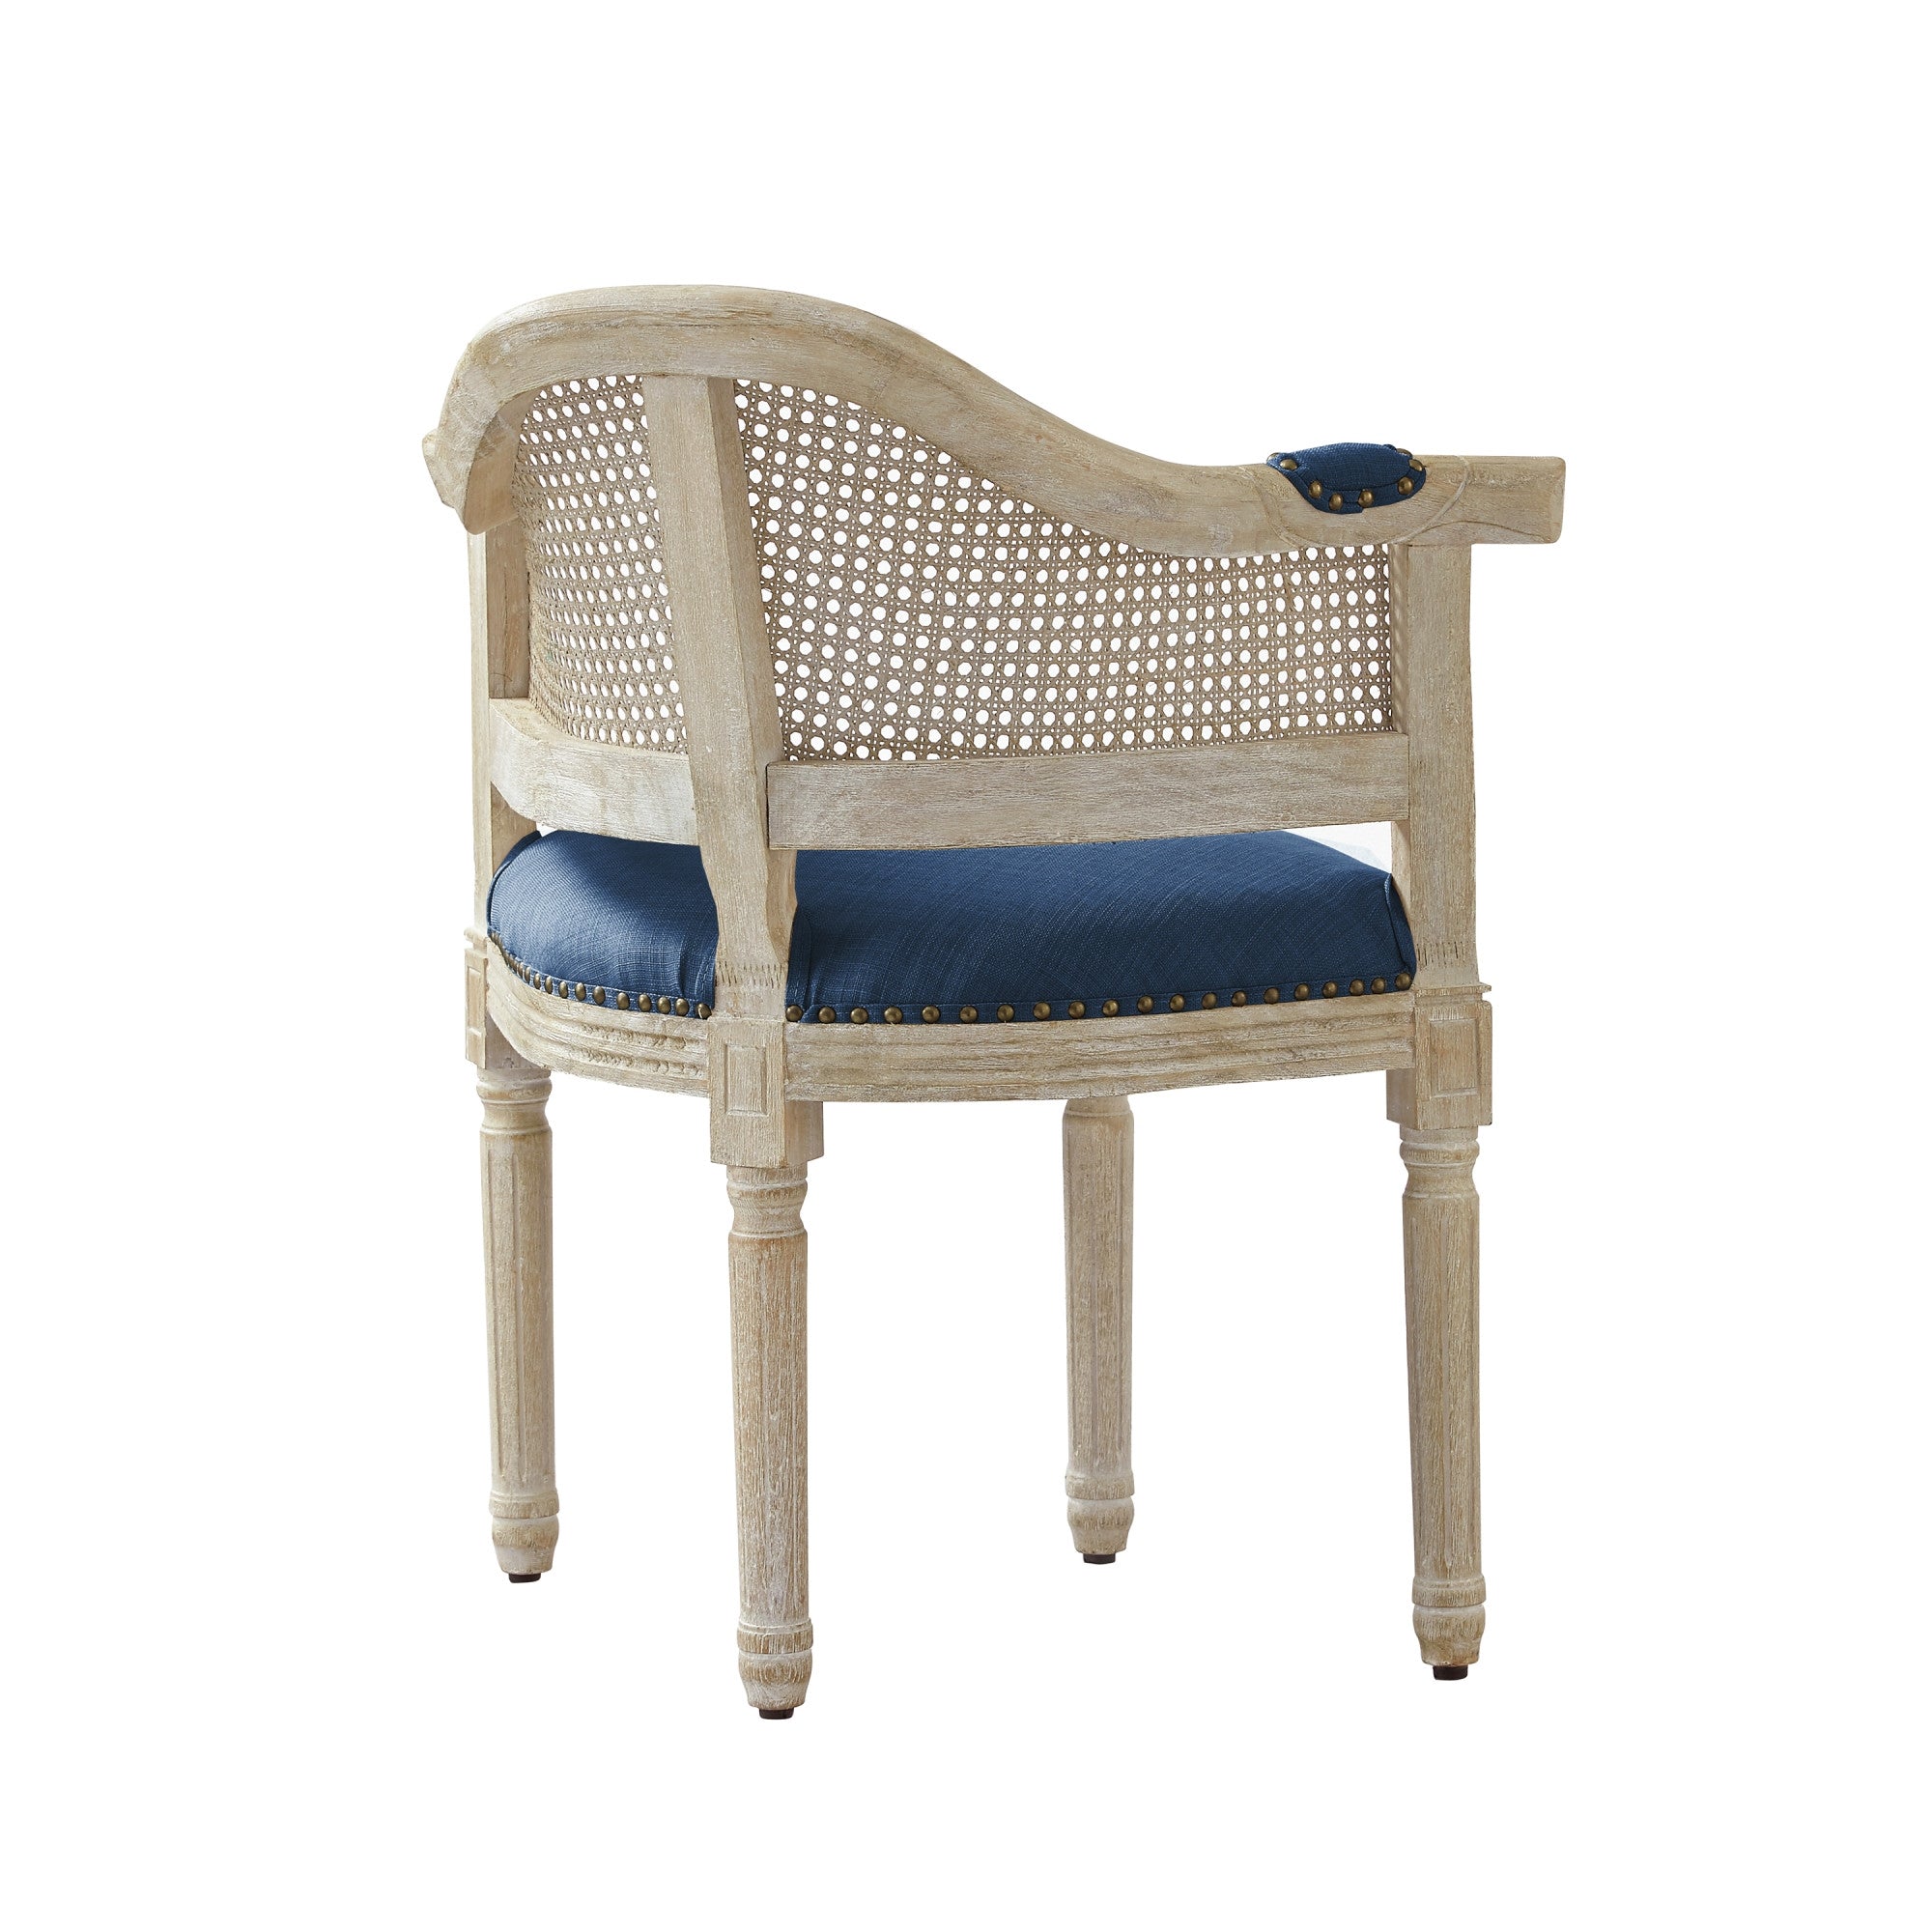 24" Navy Blue And Beige Linen Arm Chair